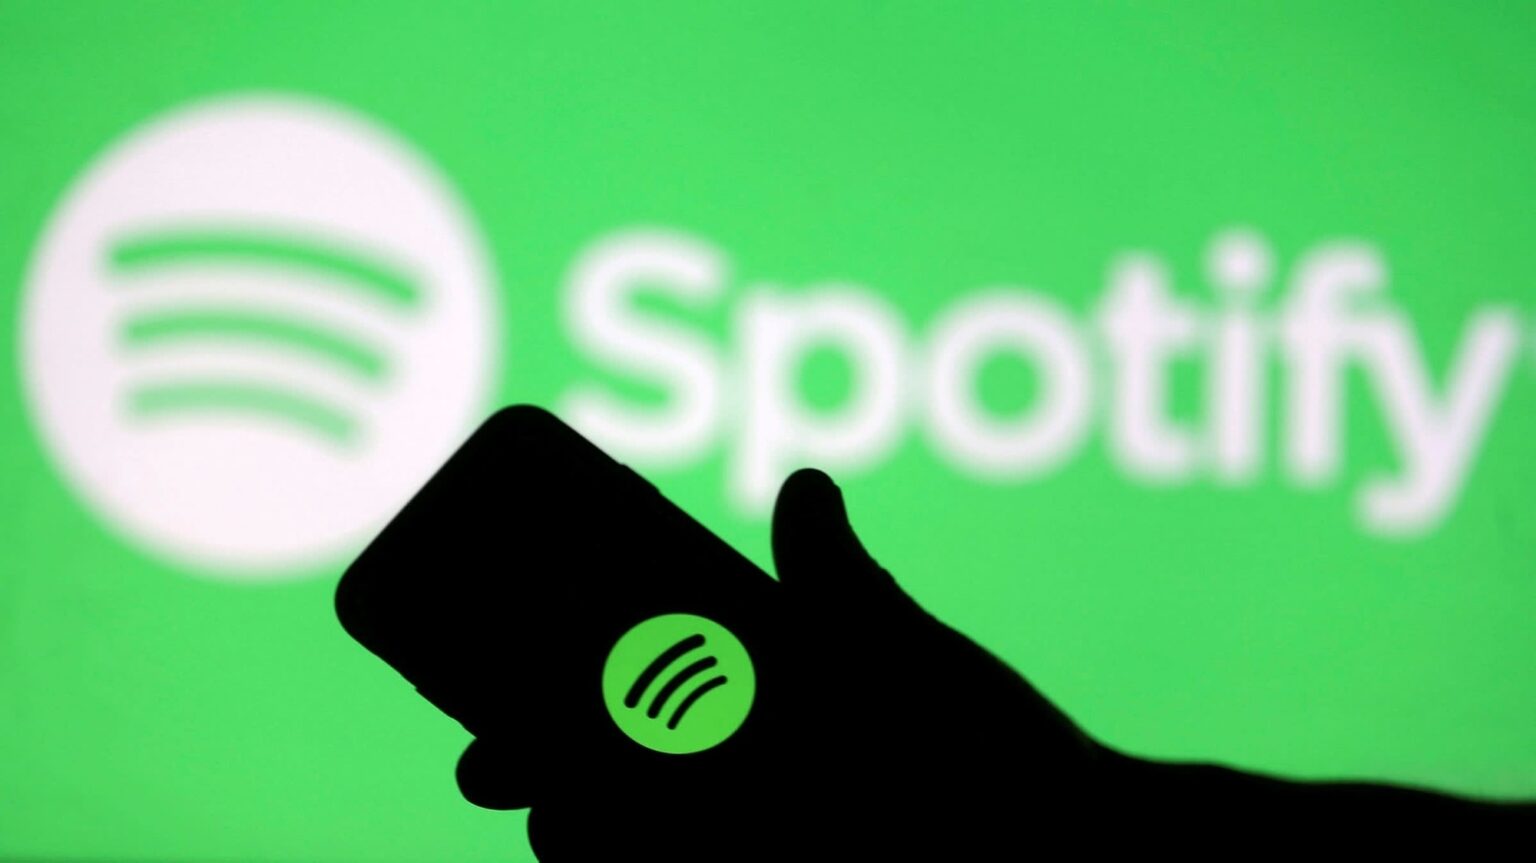 If you haven’t checked it out yet, here’s our handy guide on what to expect from Spotify Wrapped 2020.